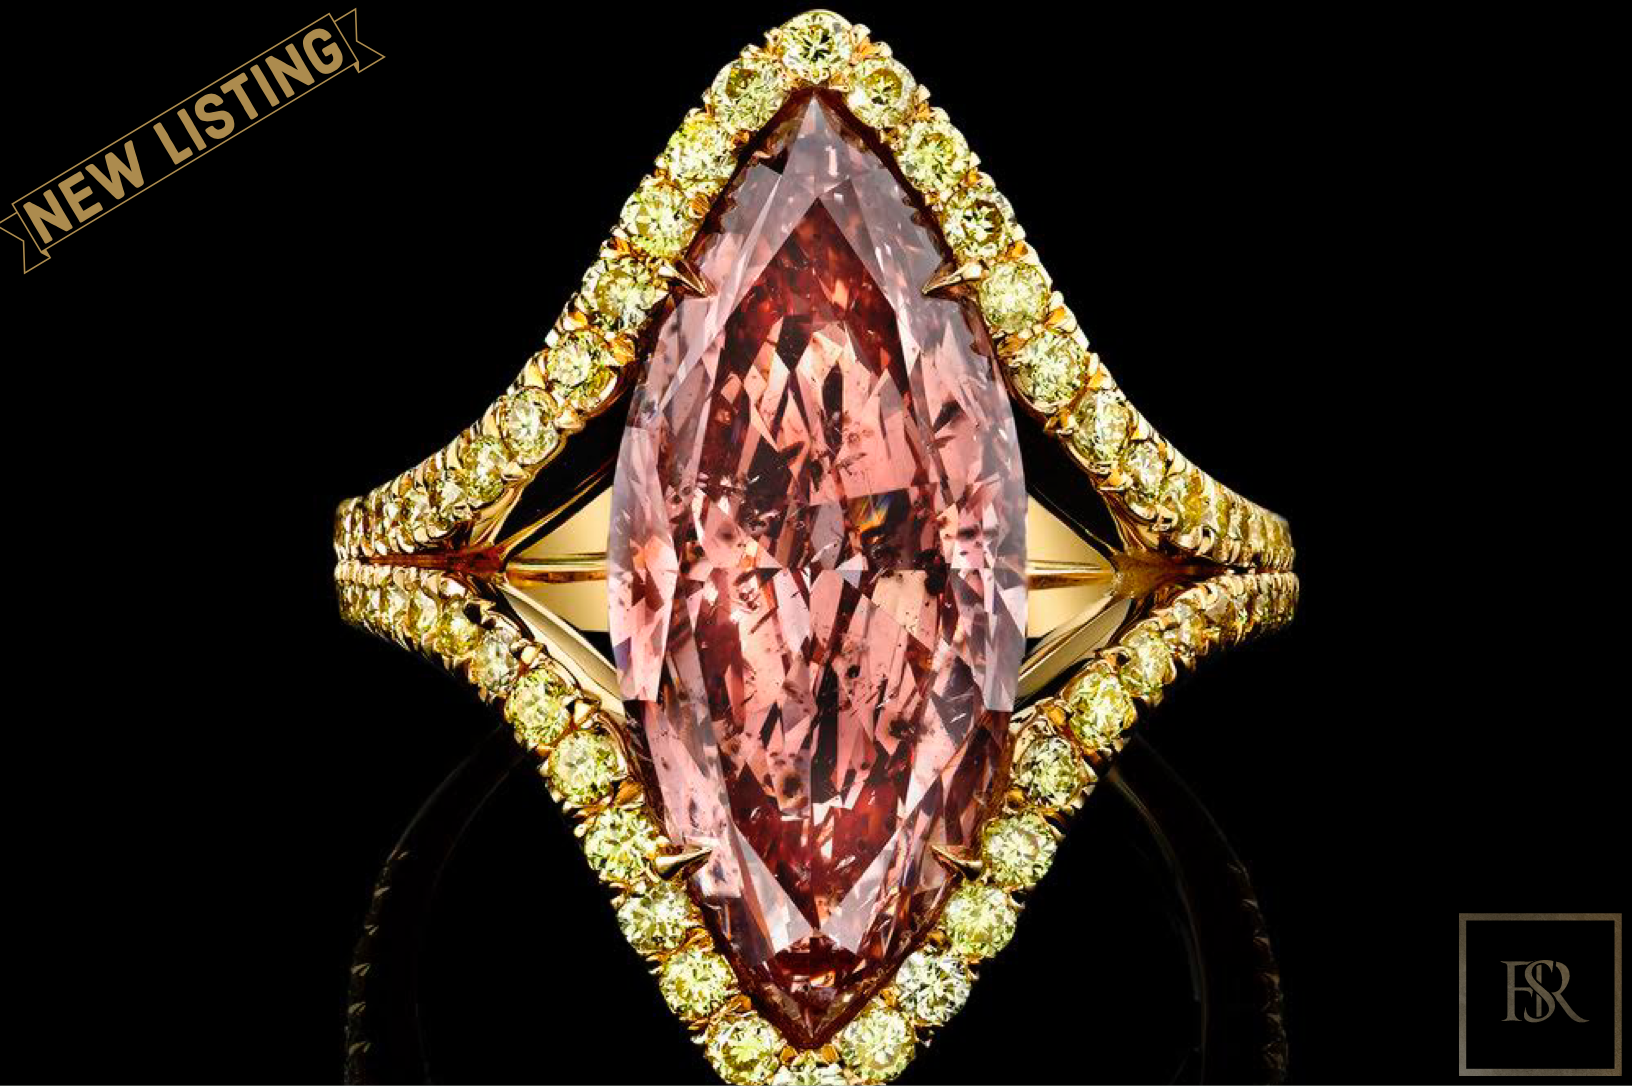 Ring 5.43CT Marquise Cut Fancy Intense Orangy Pink Diamond for sale For Super Rich